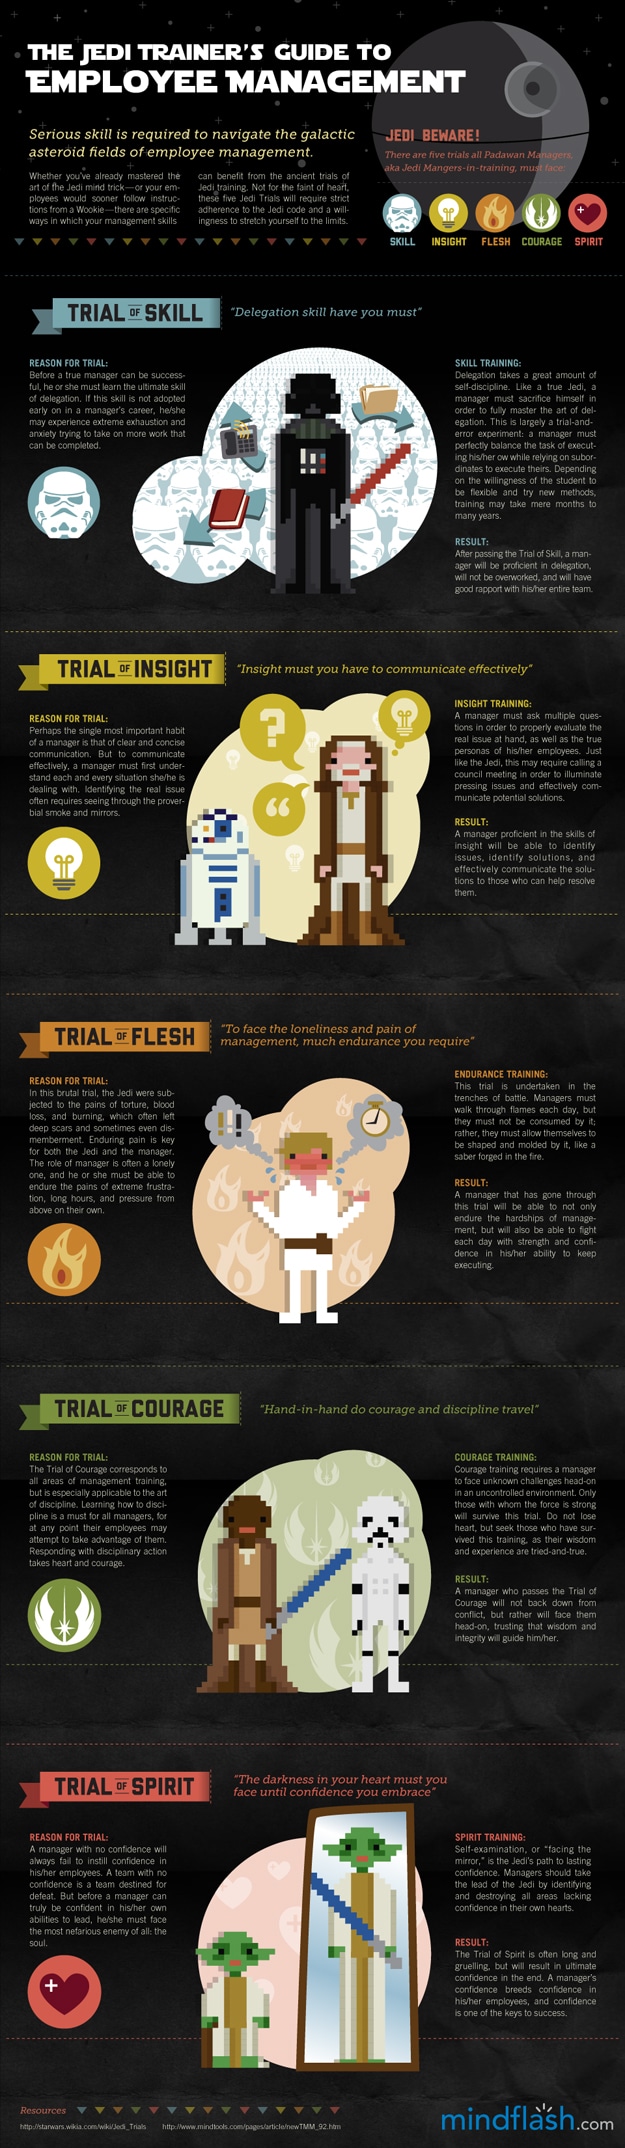 The Jedi Trainer’s Guide To Employee Management